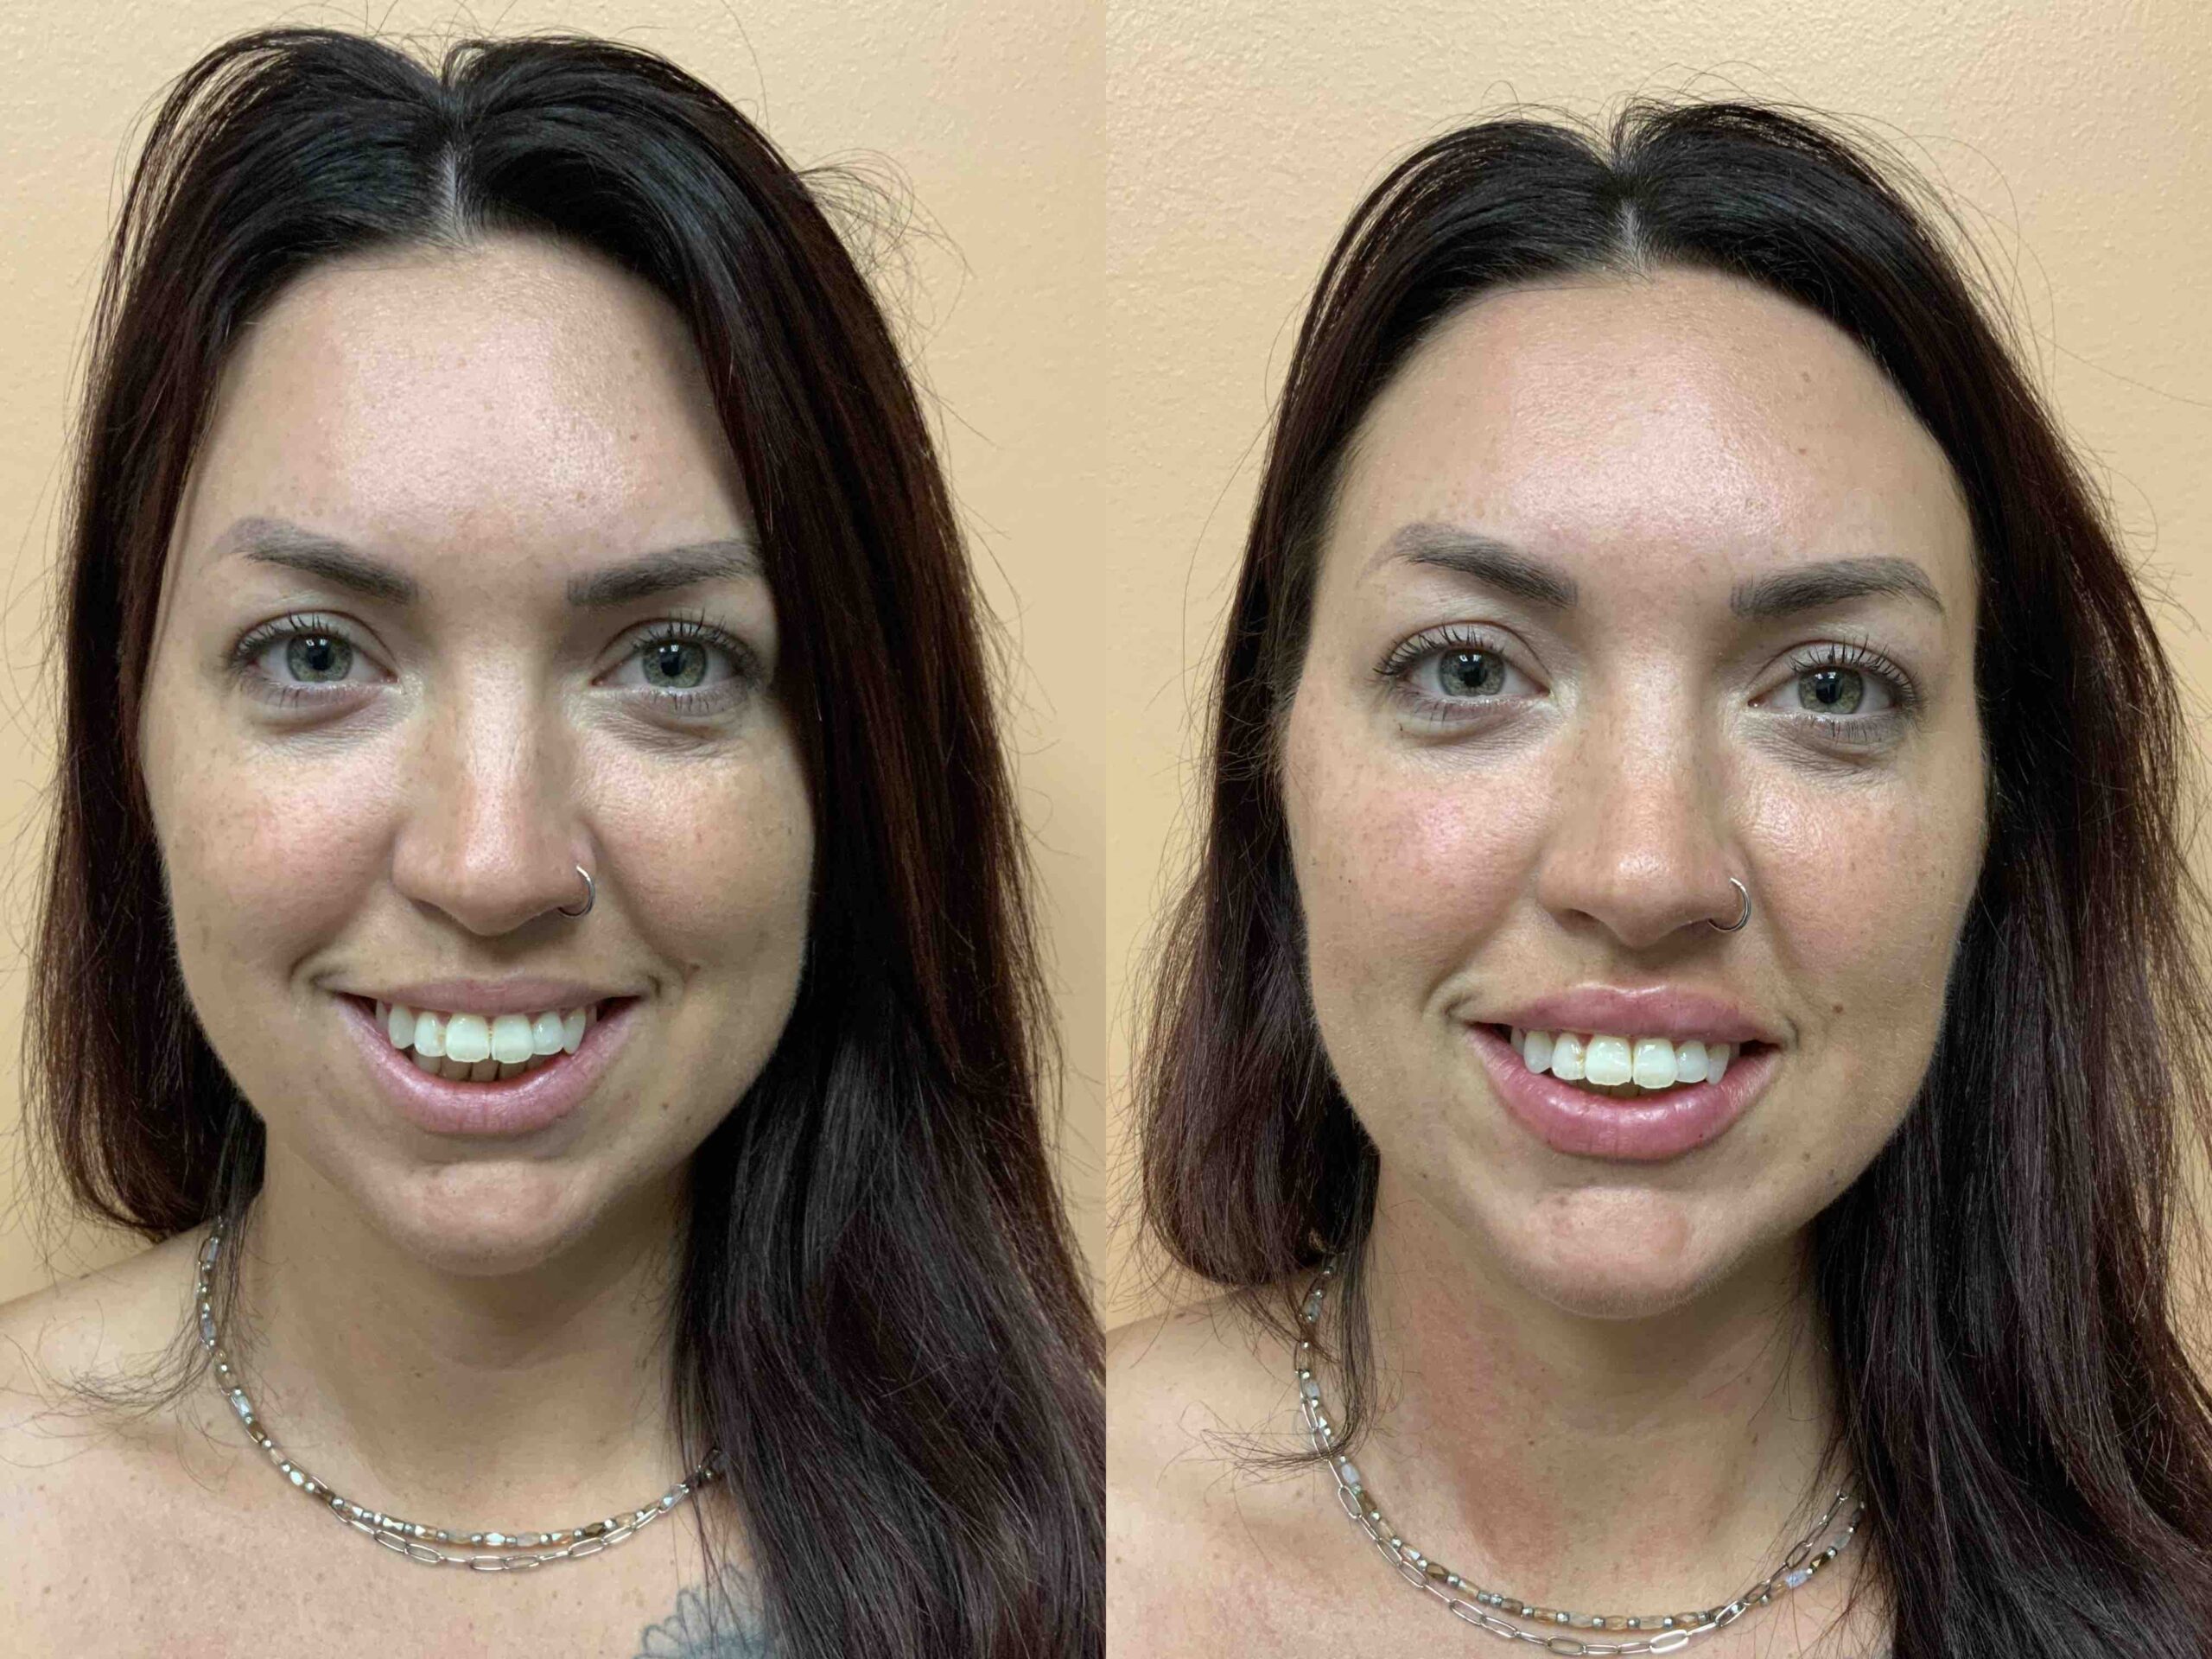 Before and after, patient same day after Fillers – Cheeks, Lips, and Jaw performed by Dr. Paul Vanek